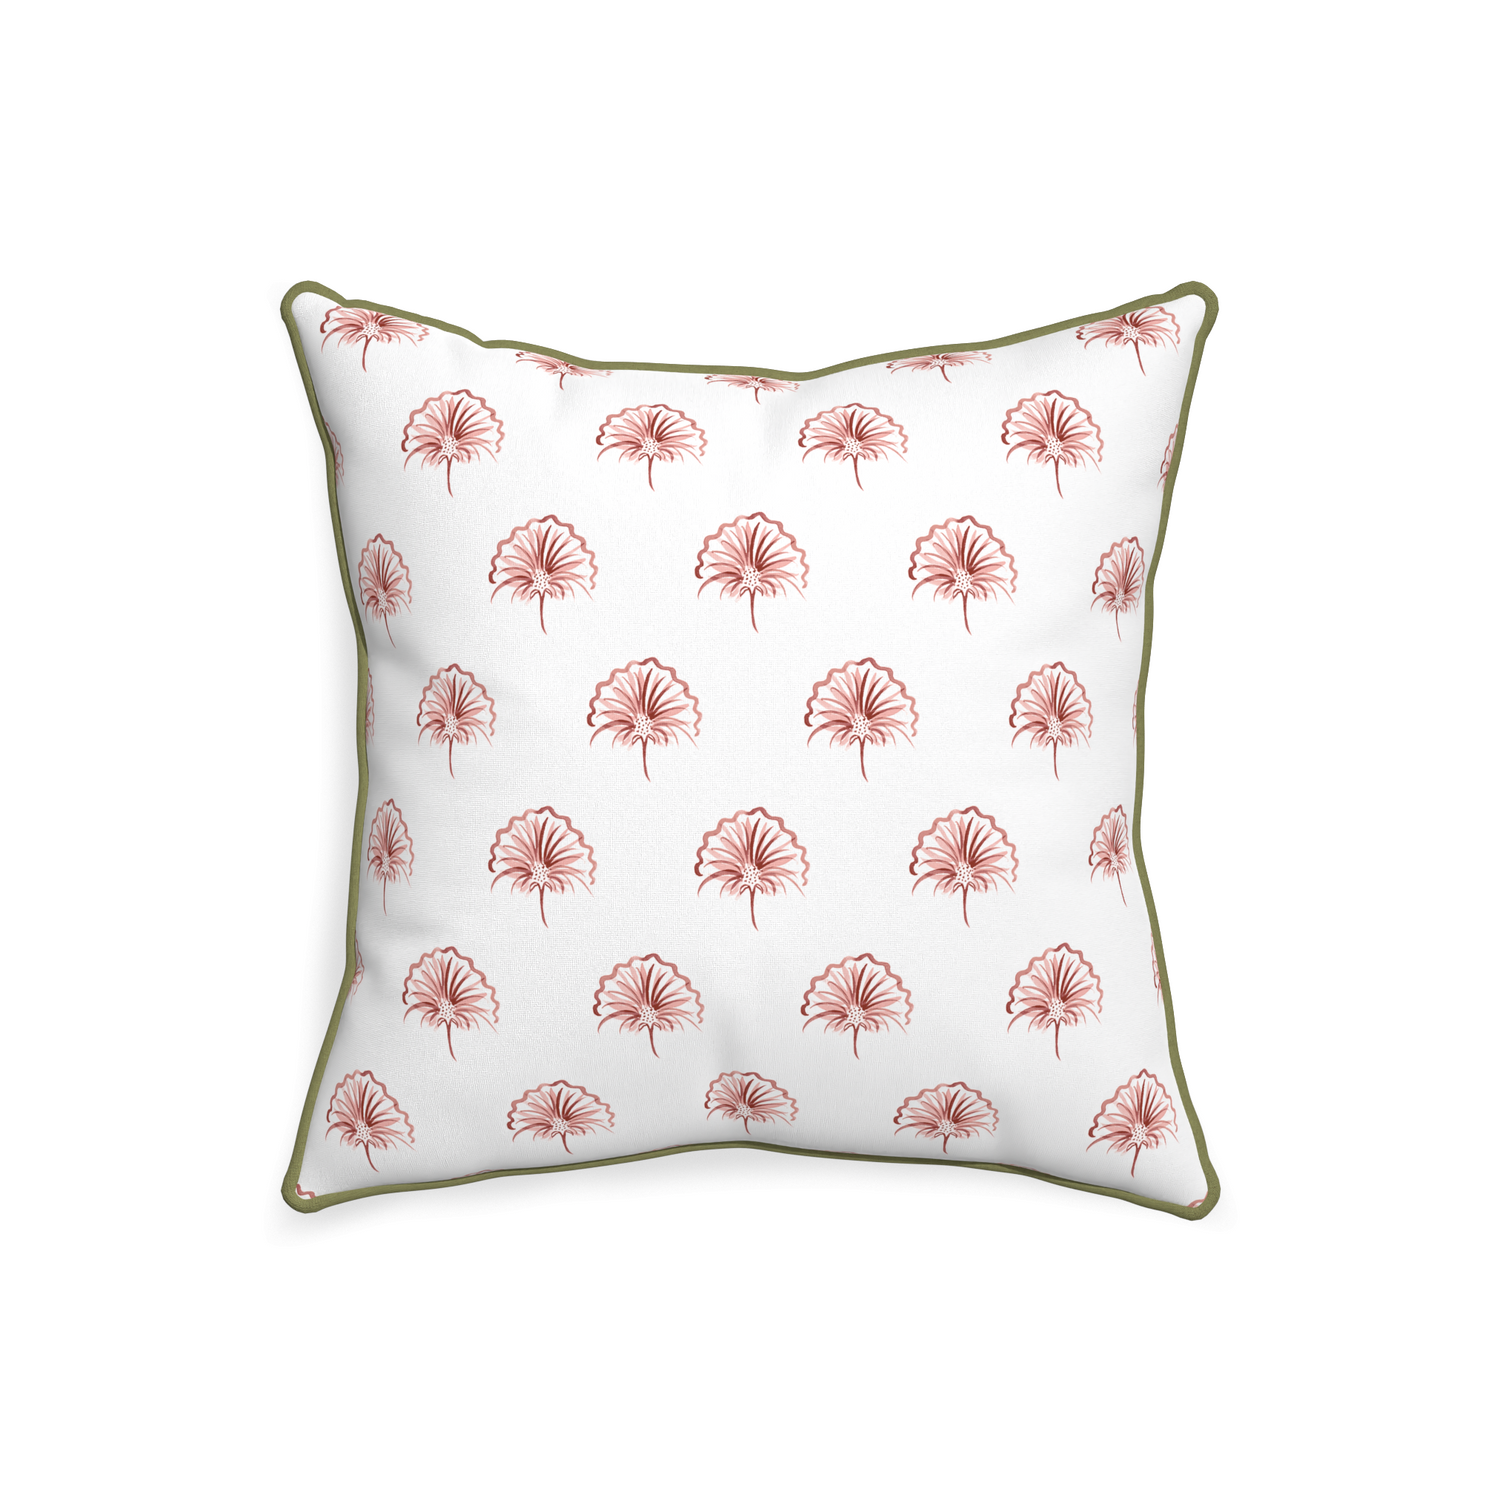 20-square penelope rose custom pillow with moss piping on white background